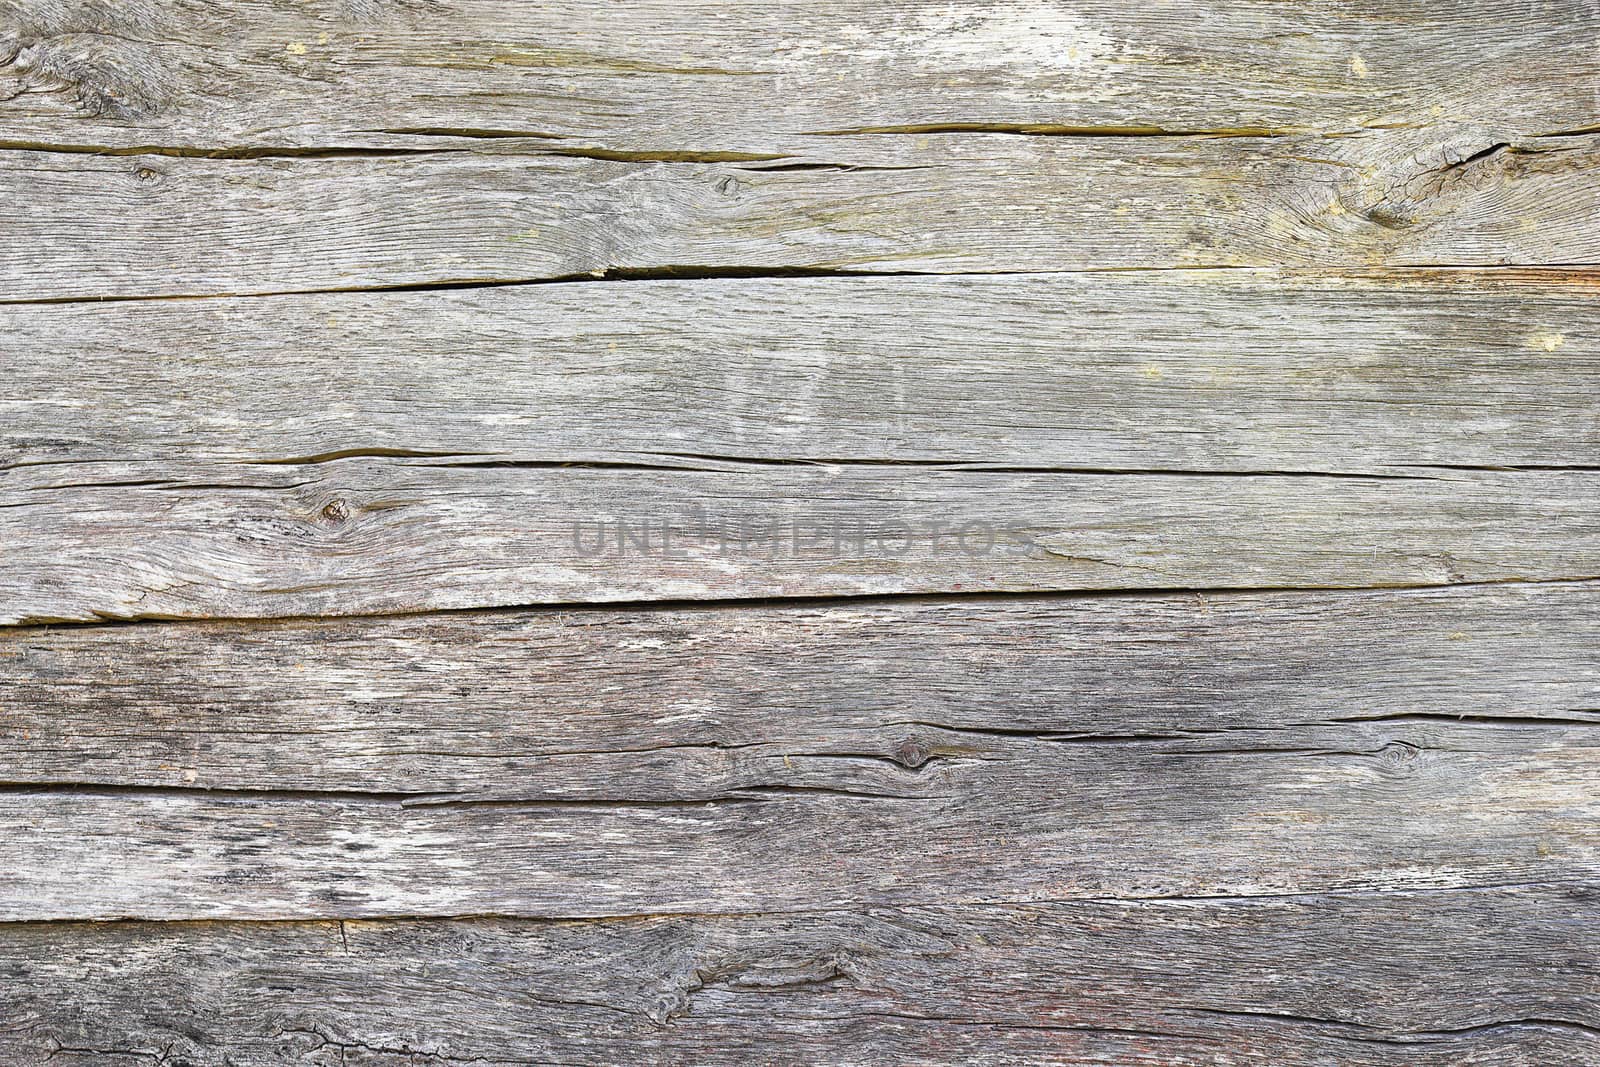 fibers on old oak wood plank ready for your design